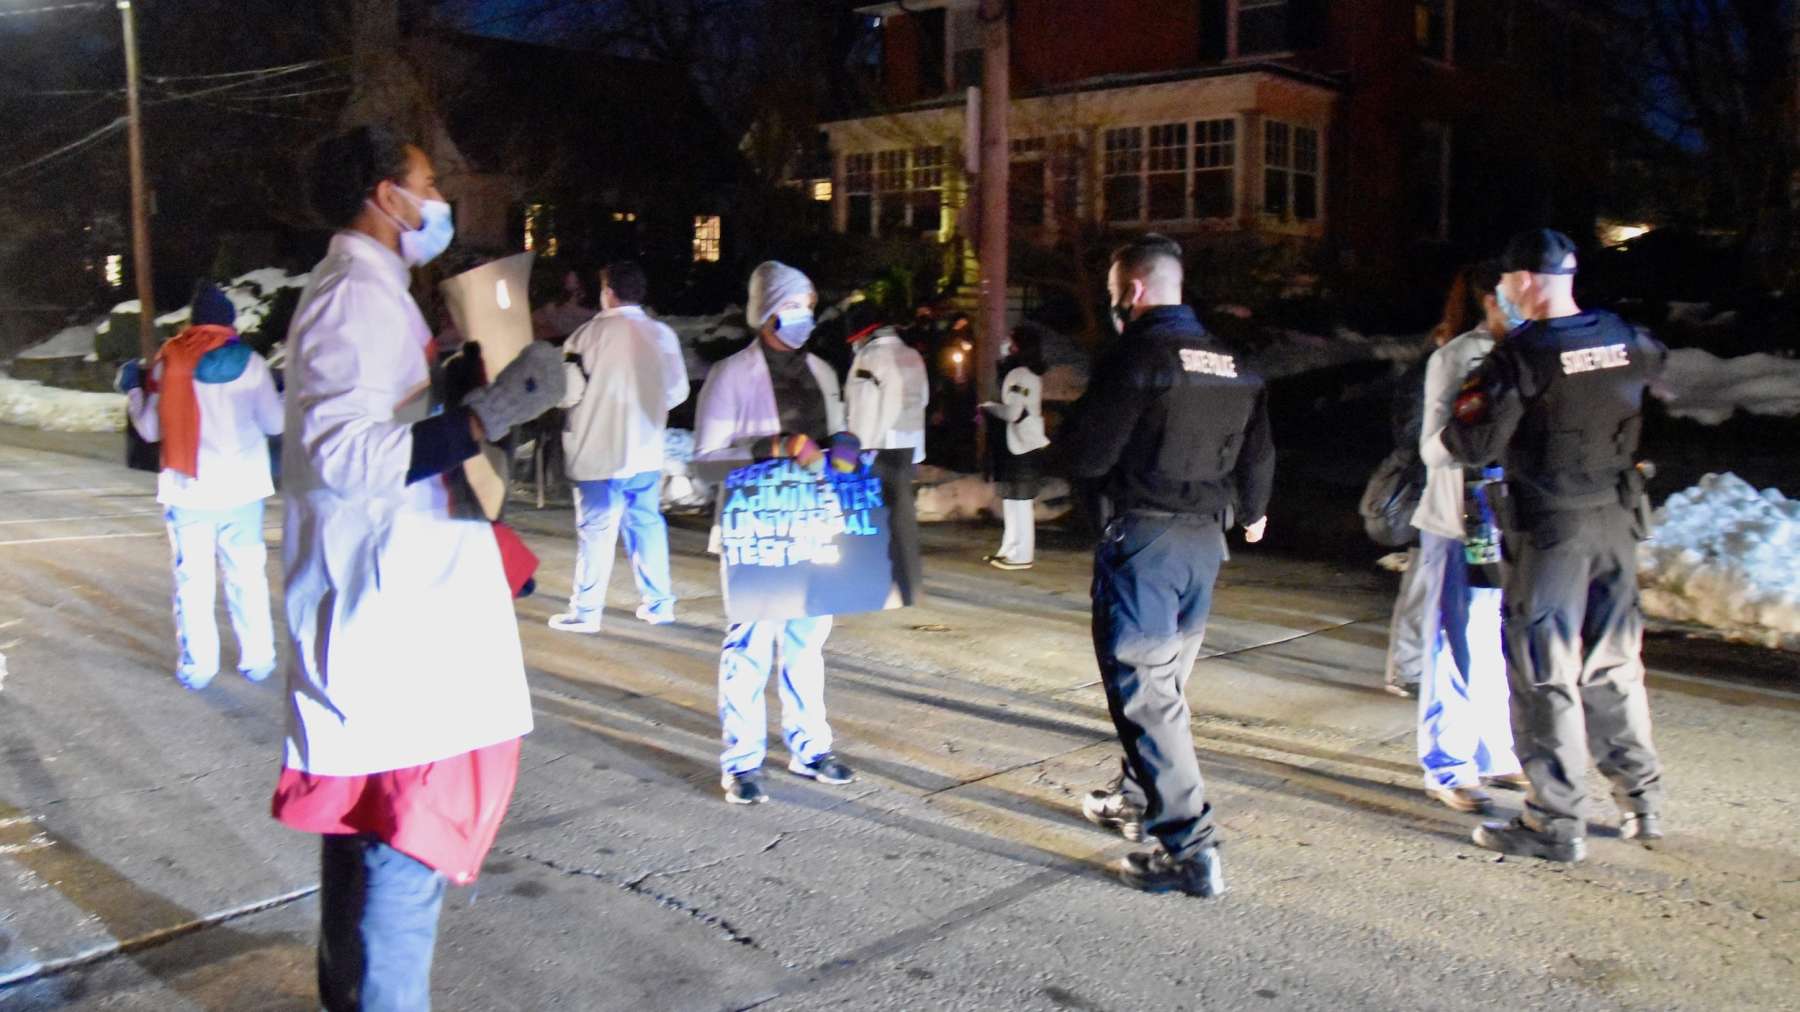 Six arrested outside Governor Raimondo’s home protesting conditions at the ACI